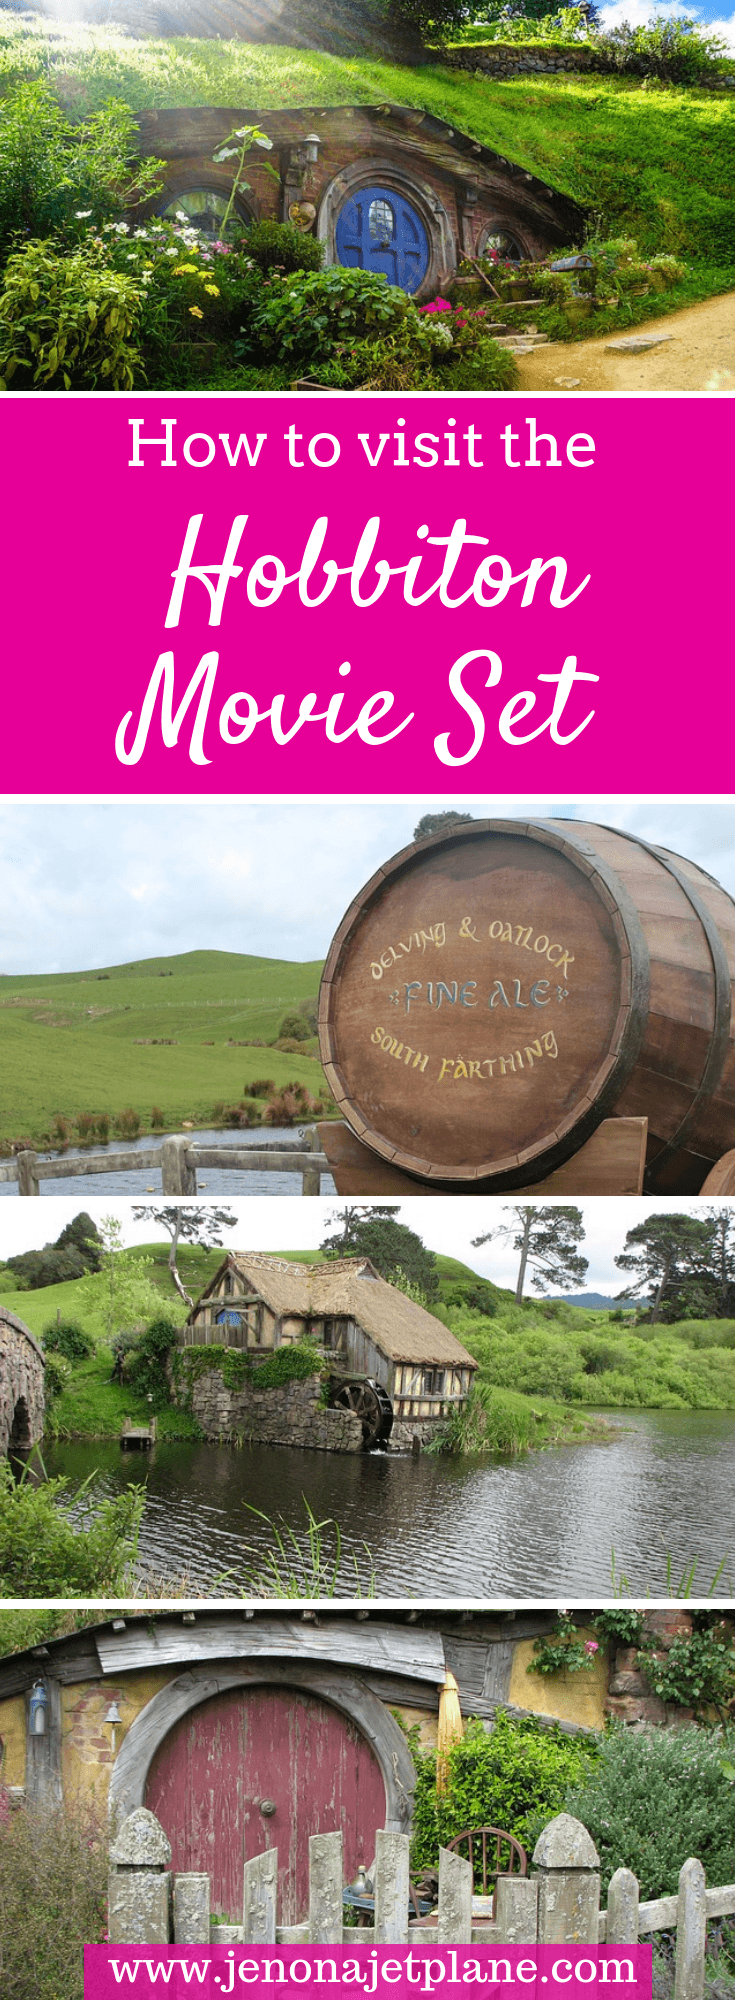 Want to visit Hobbiton Village, the Lord of the Rings movie set in New Zealand? Here's everything you need to know, from ticket prices to the best time of day to go. Save to your travel board for future reference! #newzealand #newzealandnorthisland #newzealandtravel #hobbiton #hobbitonnewzealand #hobbitontheshire #bucketlisttravel